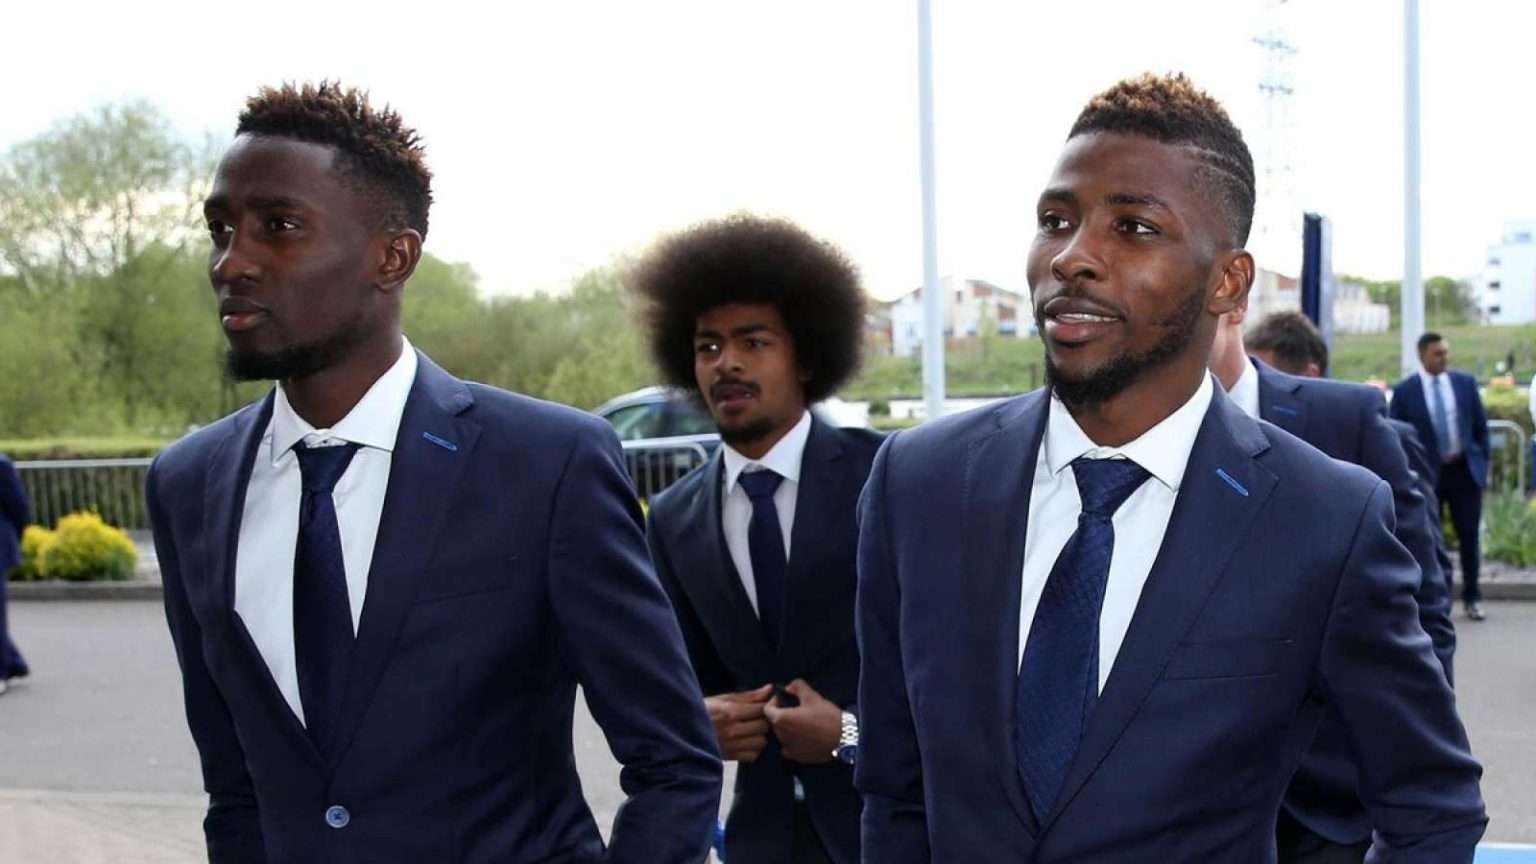 Ndidi & Iheanacho returns back to Leicester City’s training after visiting Nigeria